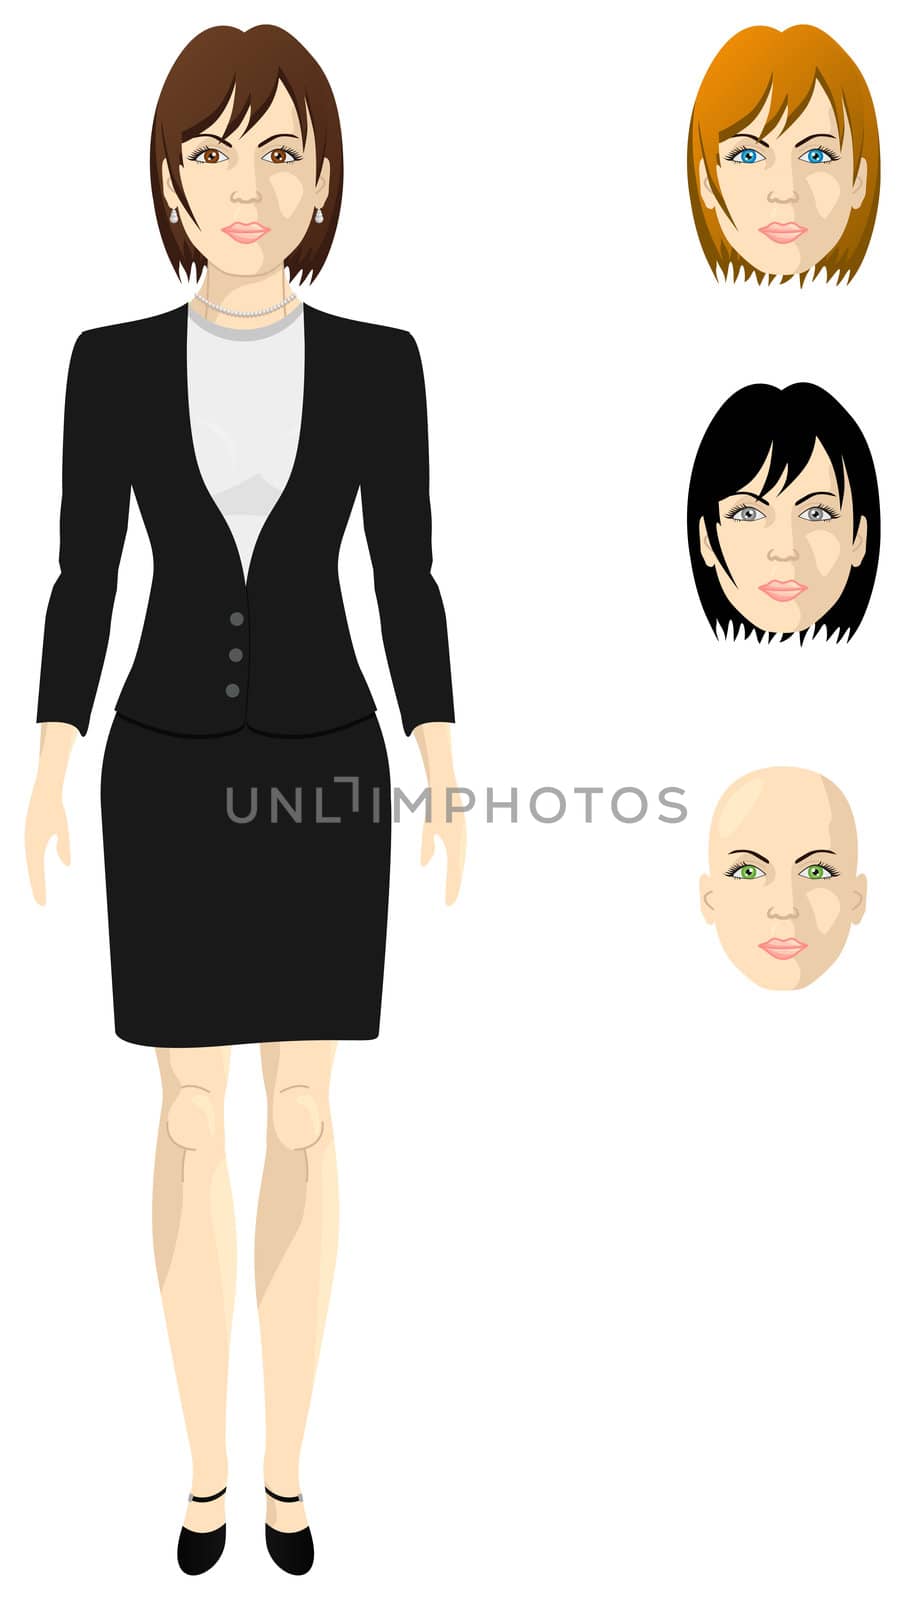 Female businesswoman in a white shirt and black shingle, thickness proportional body, the different colors of eyes and hair